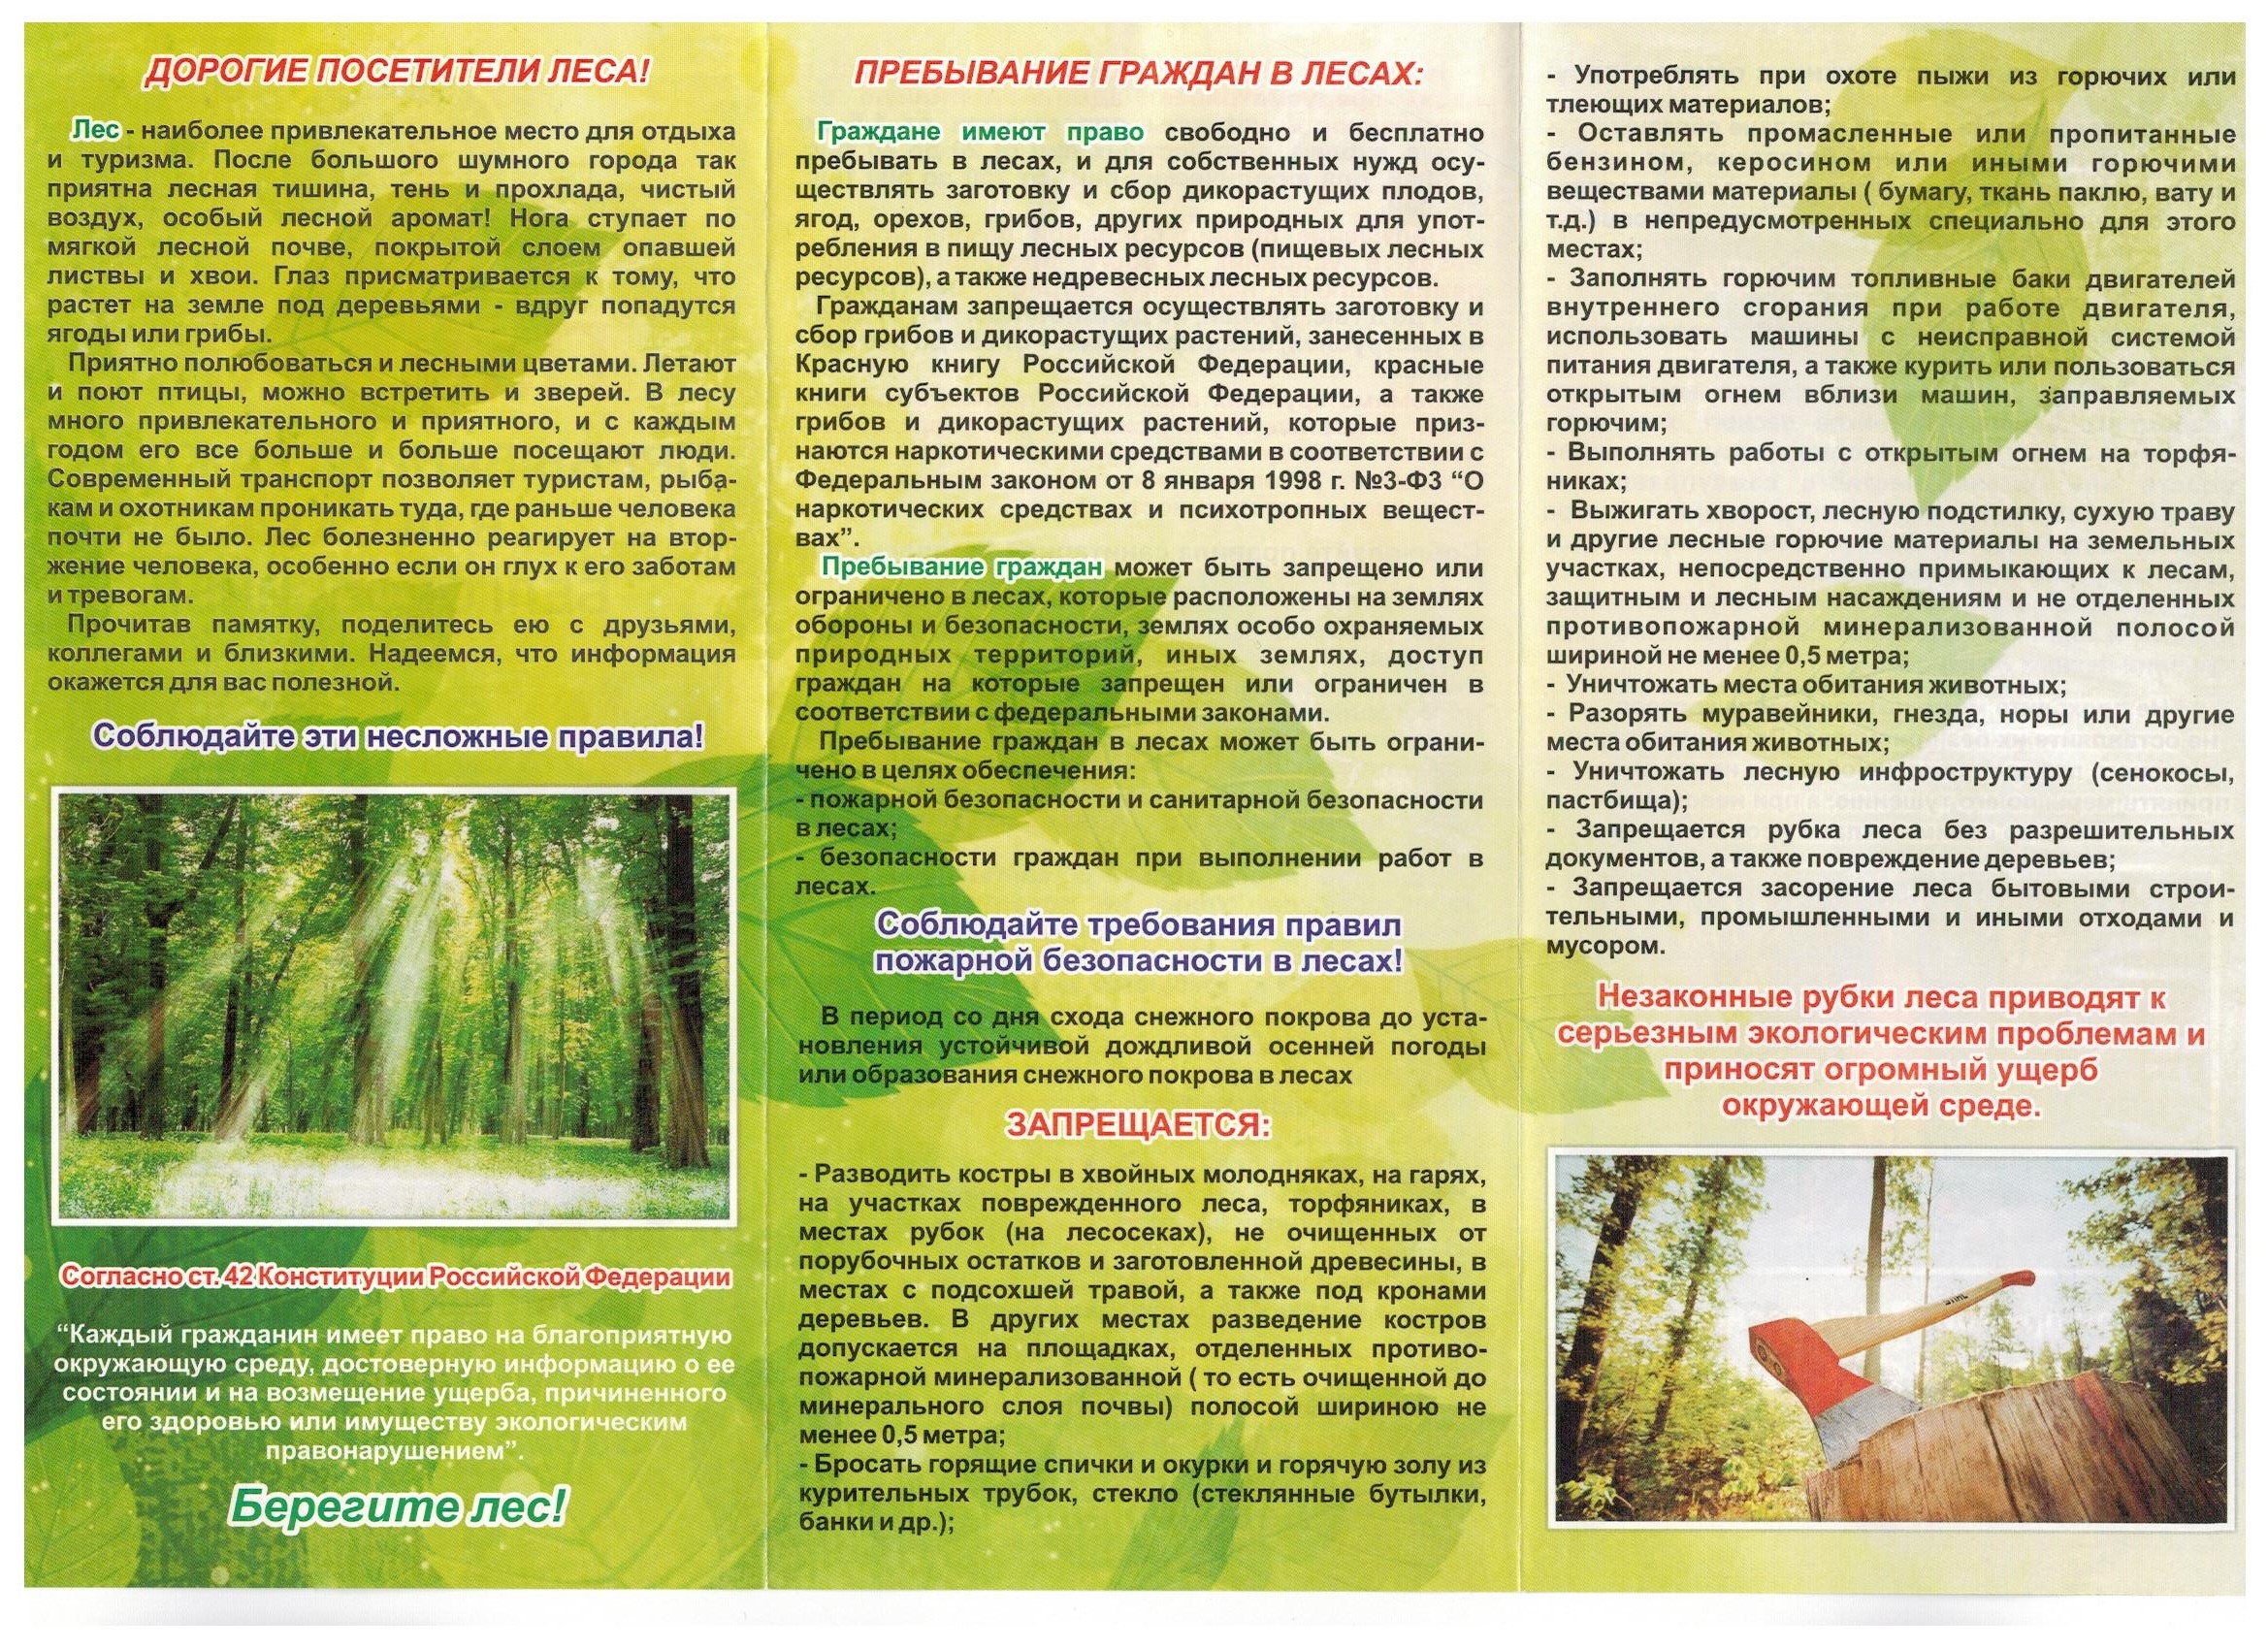 Forest code of the russian federation (rf) 2020 - 2019 moscow, saint petersburg